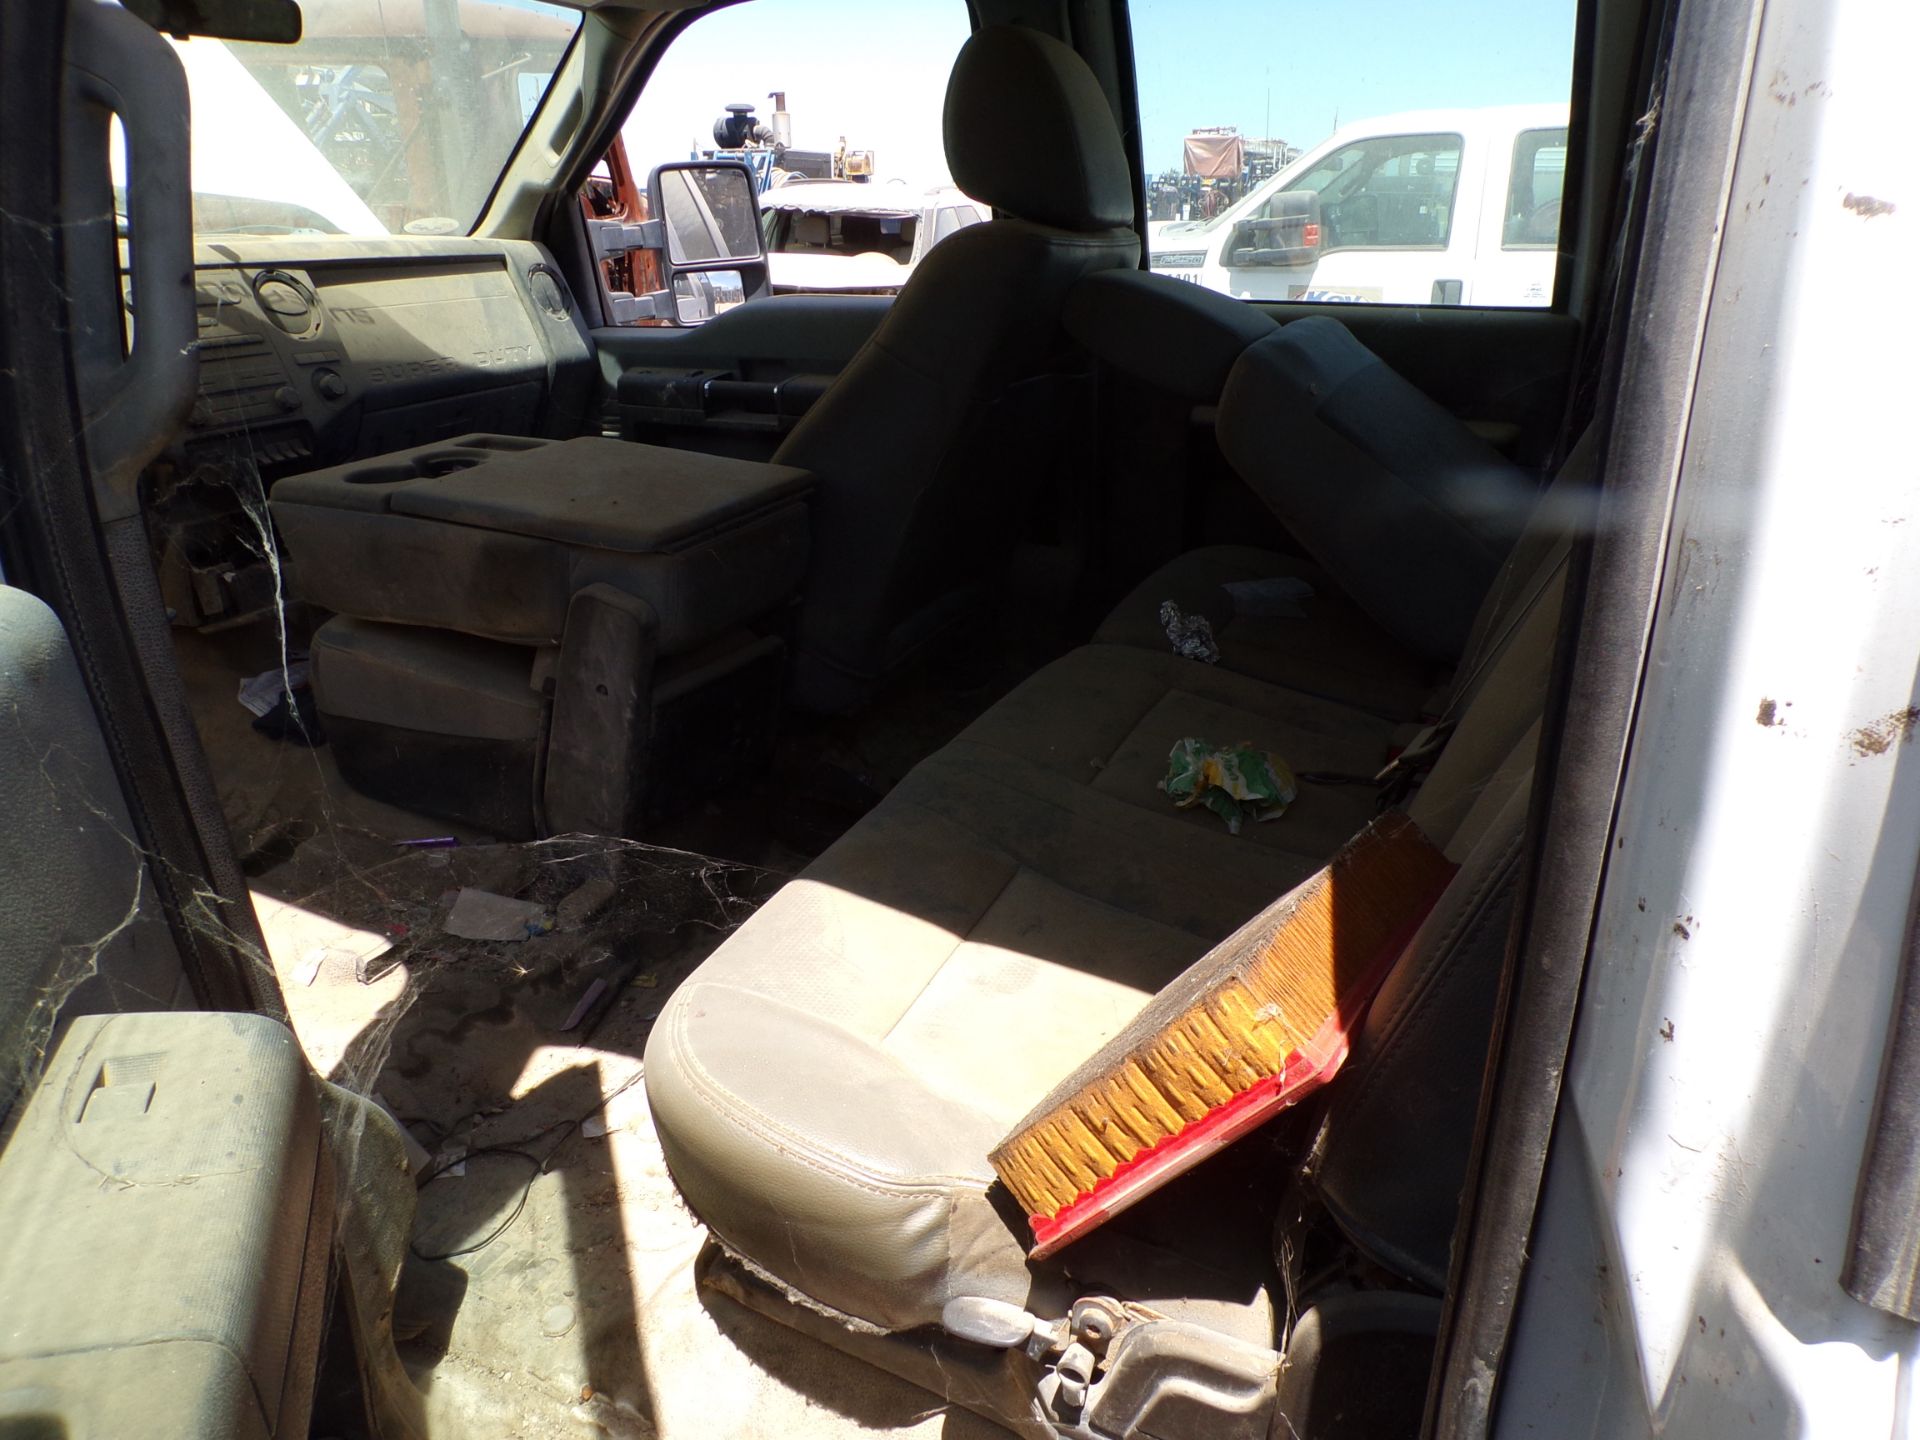 Located in YARD 14 - Bakersfield, CA (1481833) (X) 2012 FORD F450 2X4 CREW CAB PICKUP, VIN- - Image 7 of 7